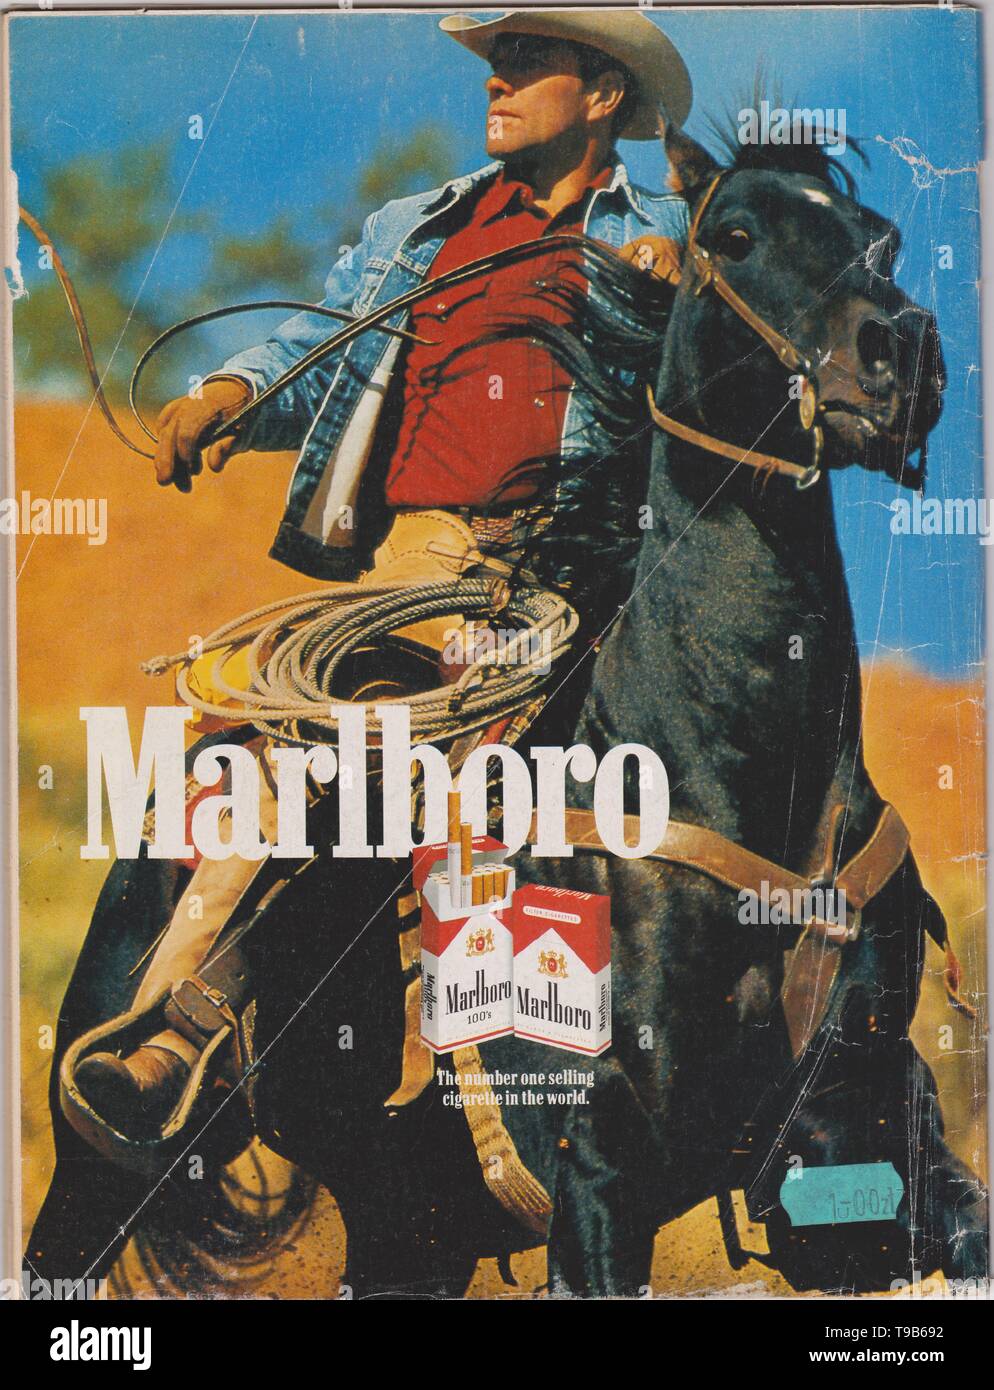 poster advertising Marlboro cigarettes, magazine from 1992, The number one selling cigarette in the world slogan, creative Marlboro advert from 1990s Stock Photo